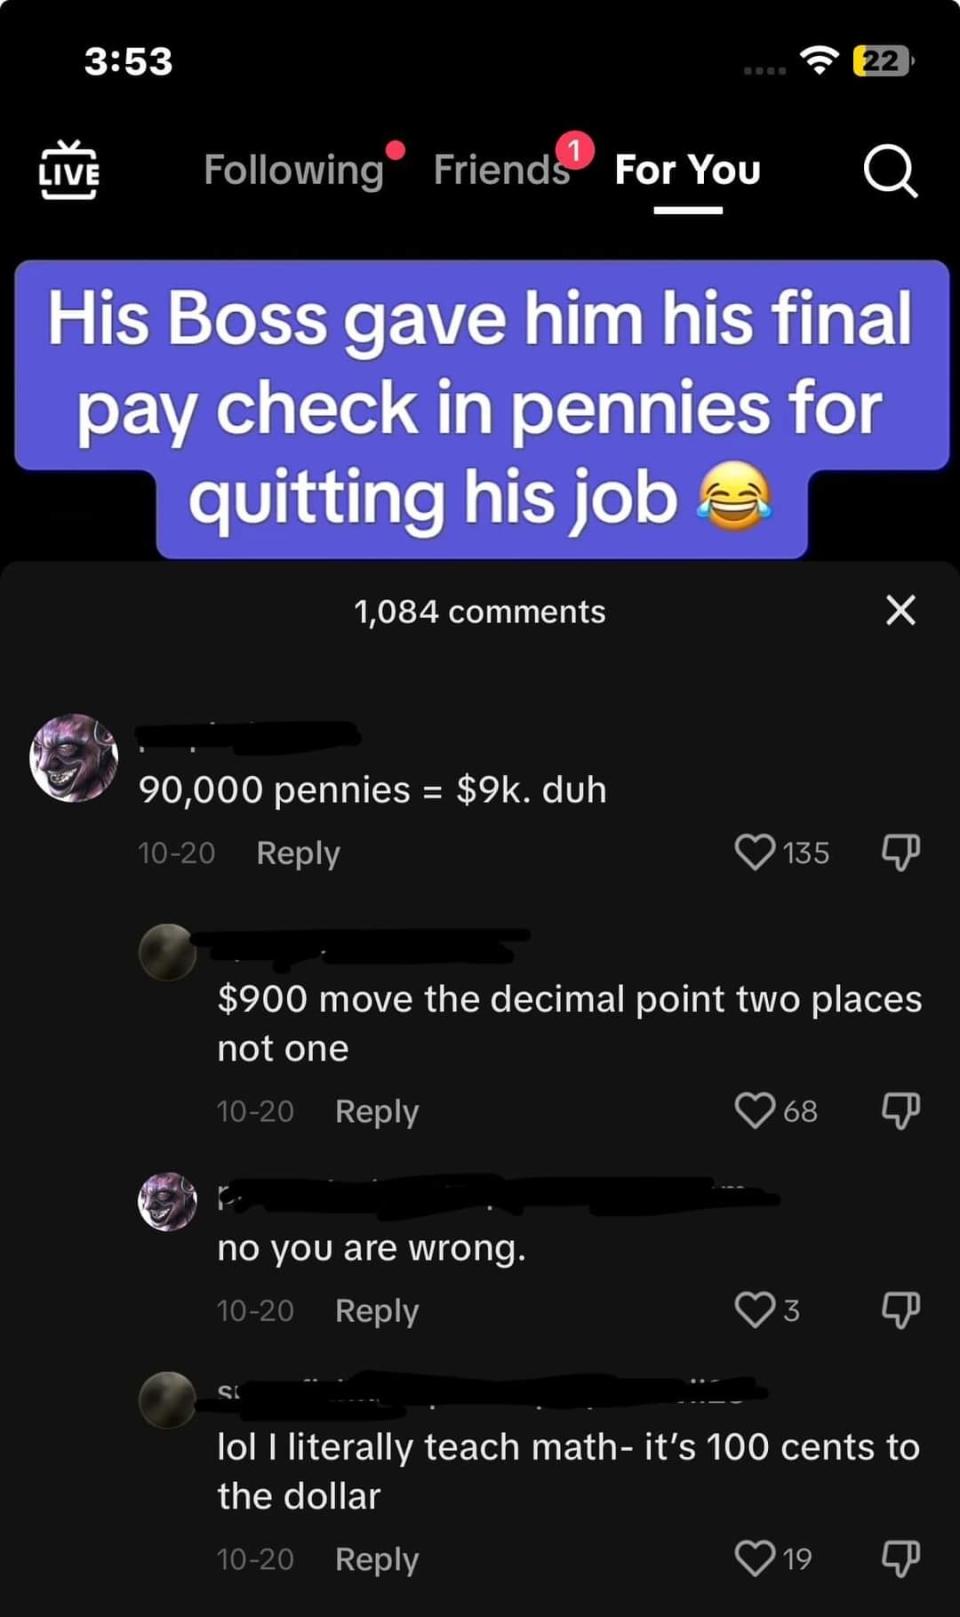 Boss gave employee his final paycheck in pennies for quitting, and someone says "90,000 pennies=$9K, duh," and someone says "$900; move the decimal point two places, not one," and they say "No, you are wrong"